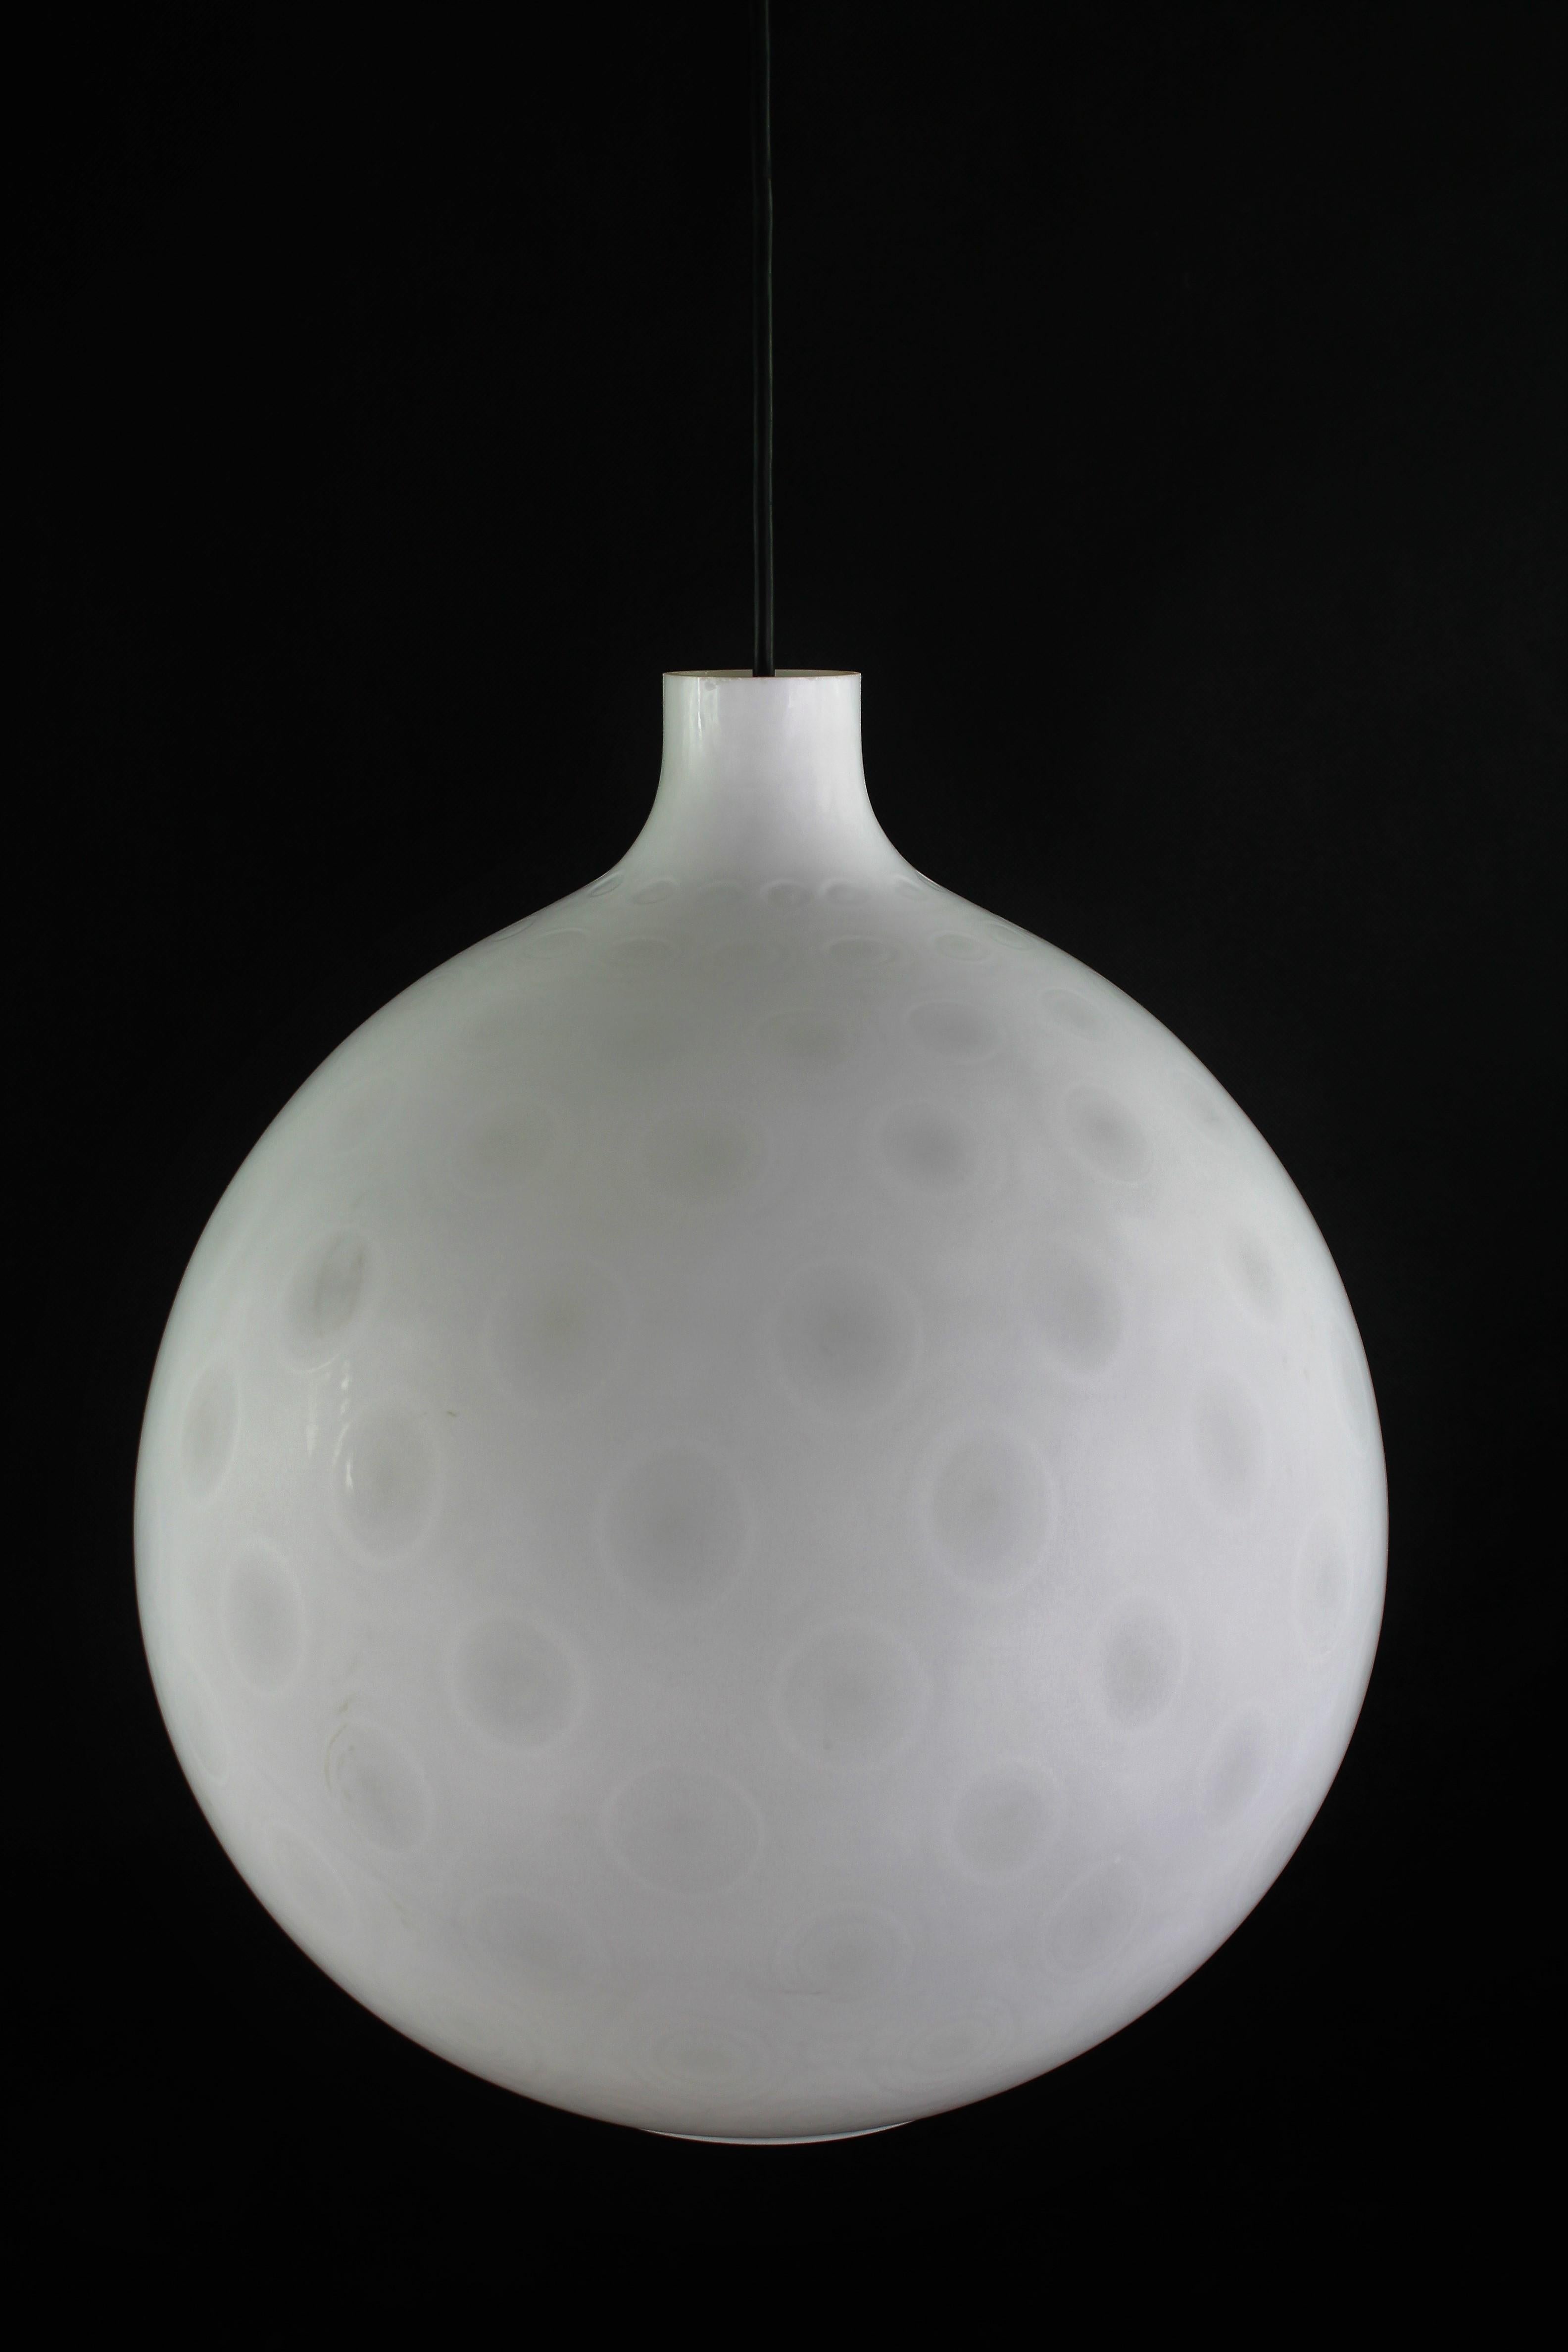 This rare large lamp is a true design classic from the 50s/60s. This lamp in an unusual design has an organically shaped shade made of thick, milk-white glass with a moonlike, round pattern in the glass.
This vintage lamp is an original and gives a